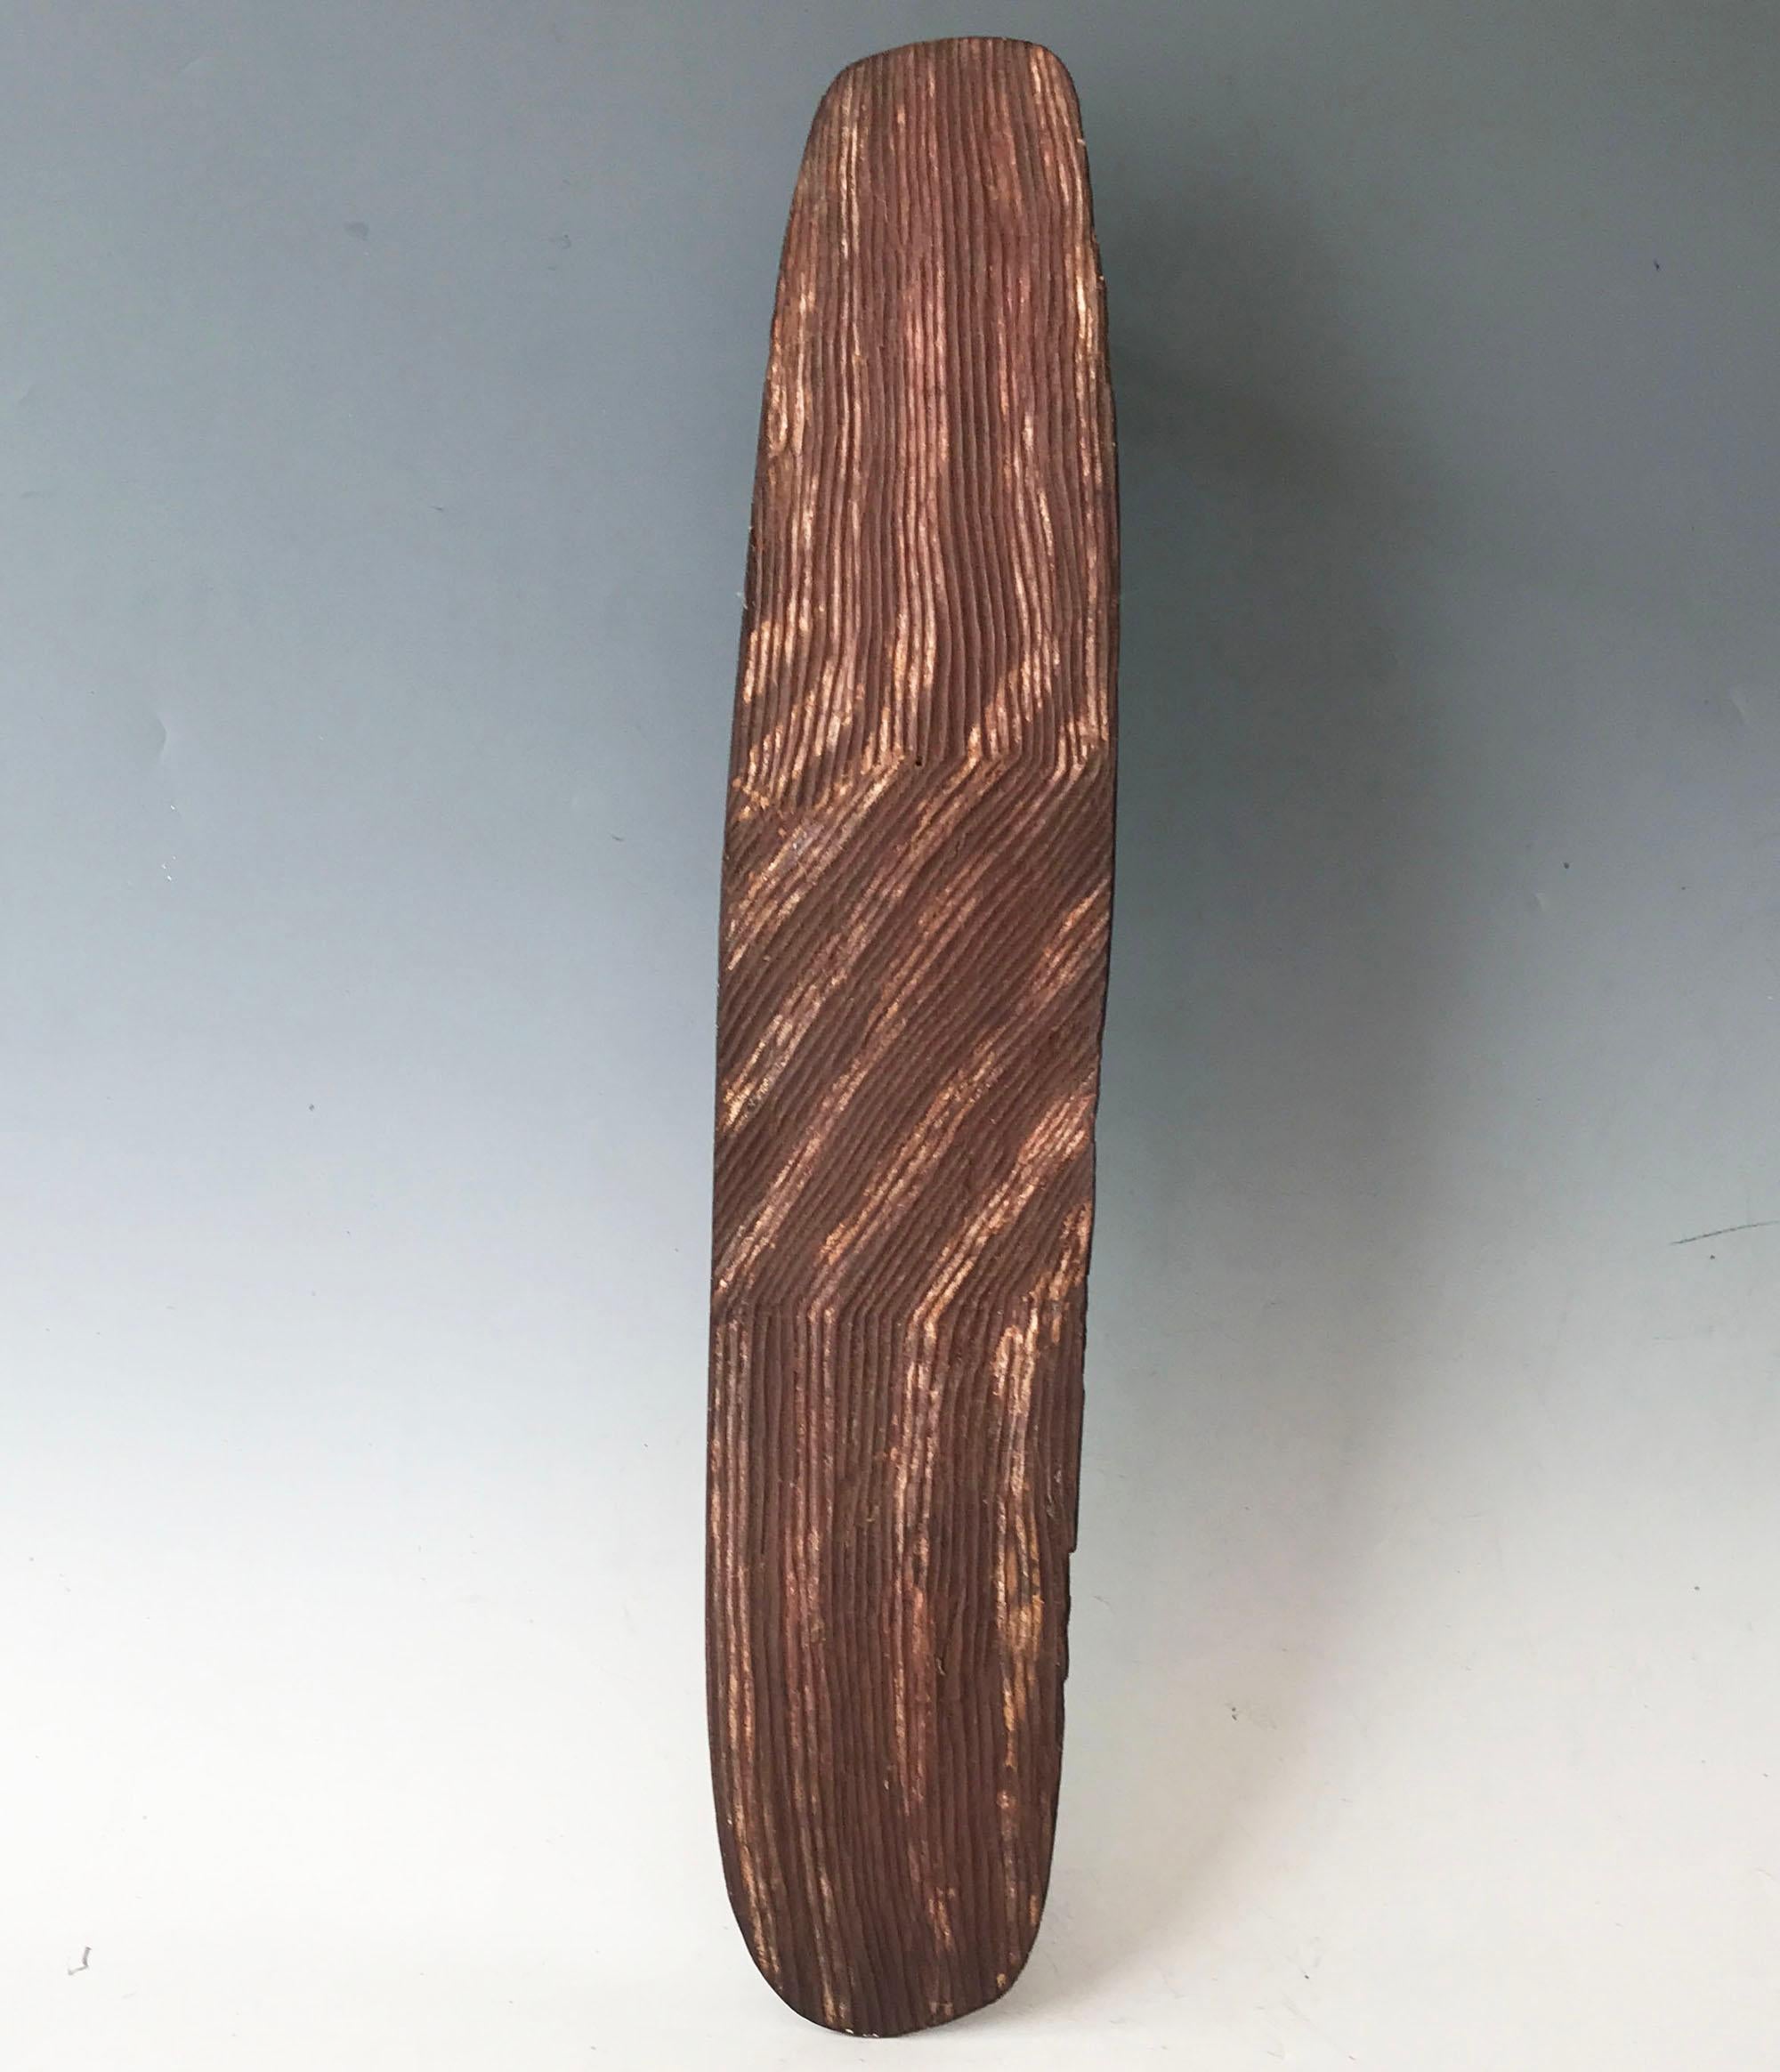 Fine Aboriginal Wunda shield in hard wood carved on both sides with Zigzag Geometric fluted design colored with red and cream pigment. As well as a collectible historical Tribal artifact this Shield makes a great object for a Interior design element